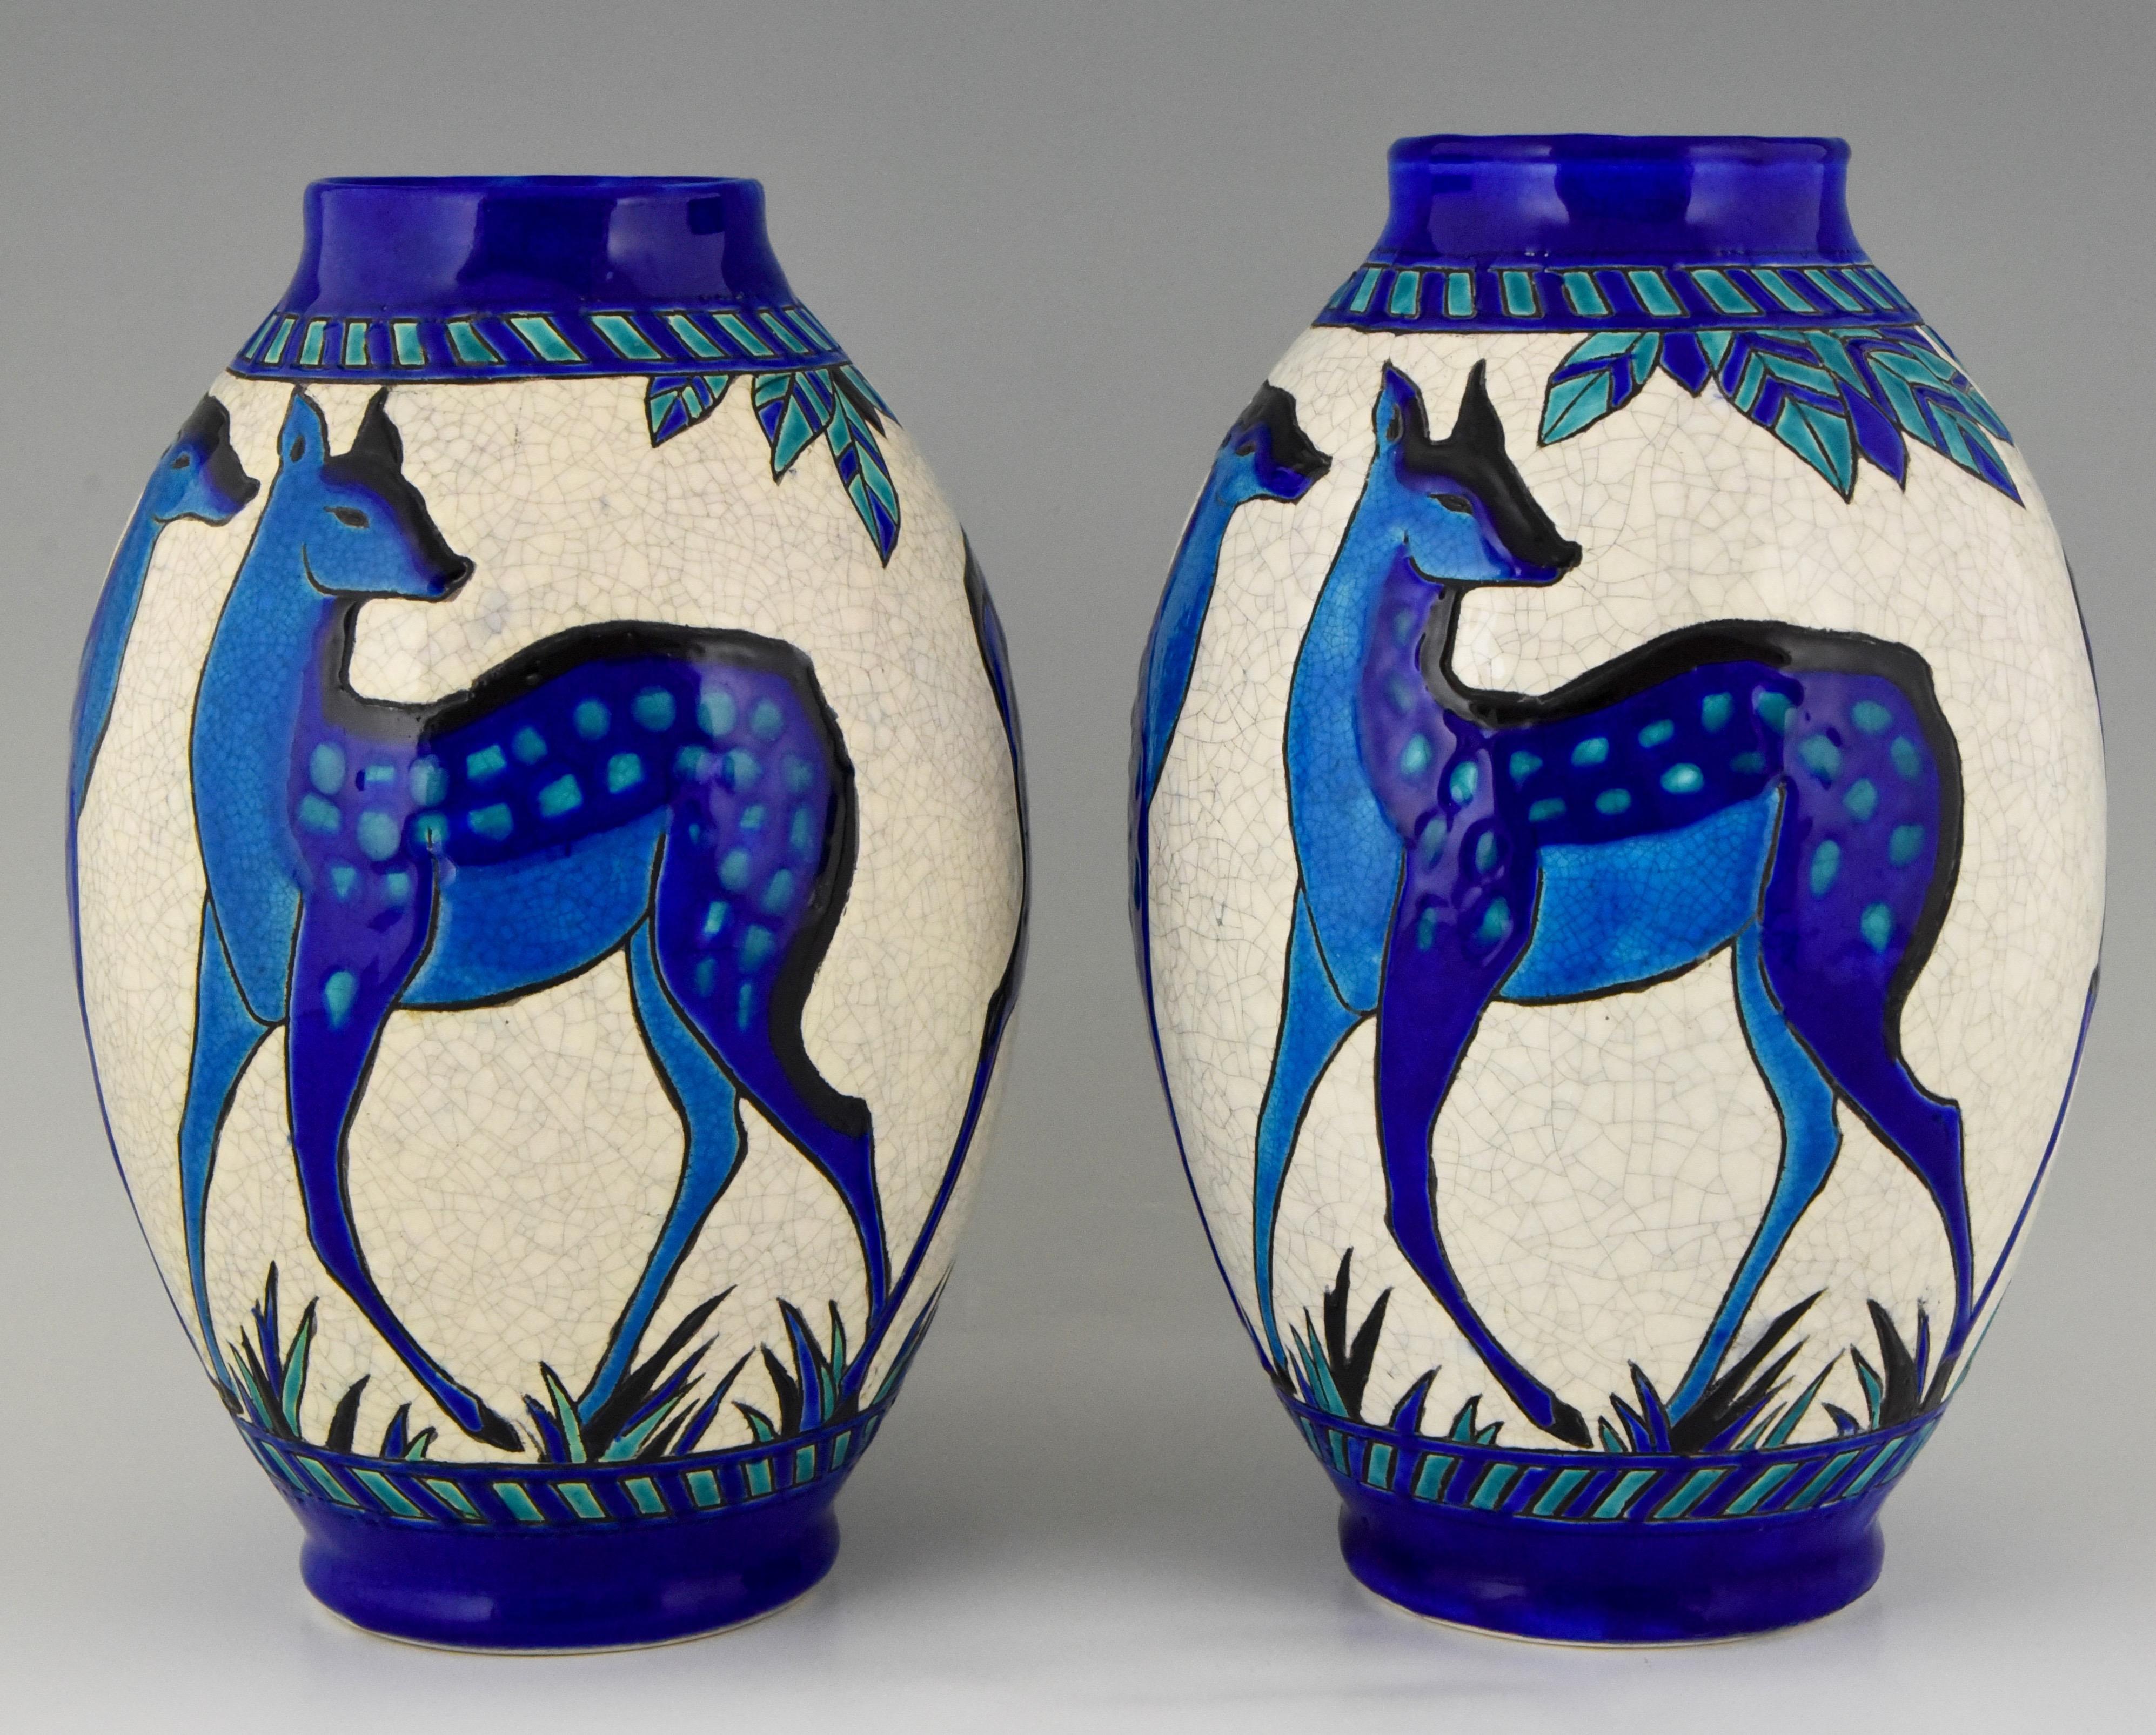 Very nice pair of Art Deco vases with blue deer designed by Charles Catteau from the line Biches Bleues for Keramls, Belgium. 1924/1925.The line was exhibited at the 1925 Exposition Internationale des Arts Decoratifs et Industriels in Paris.